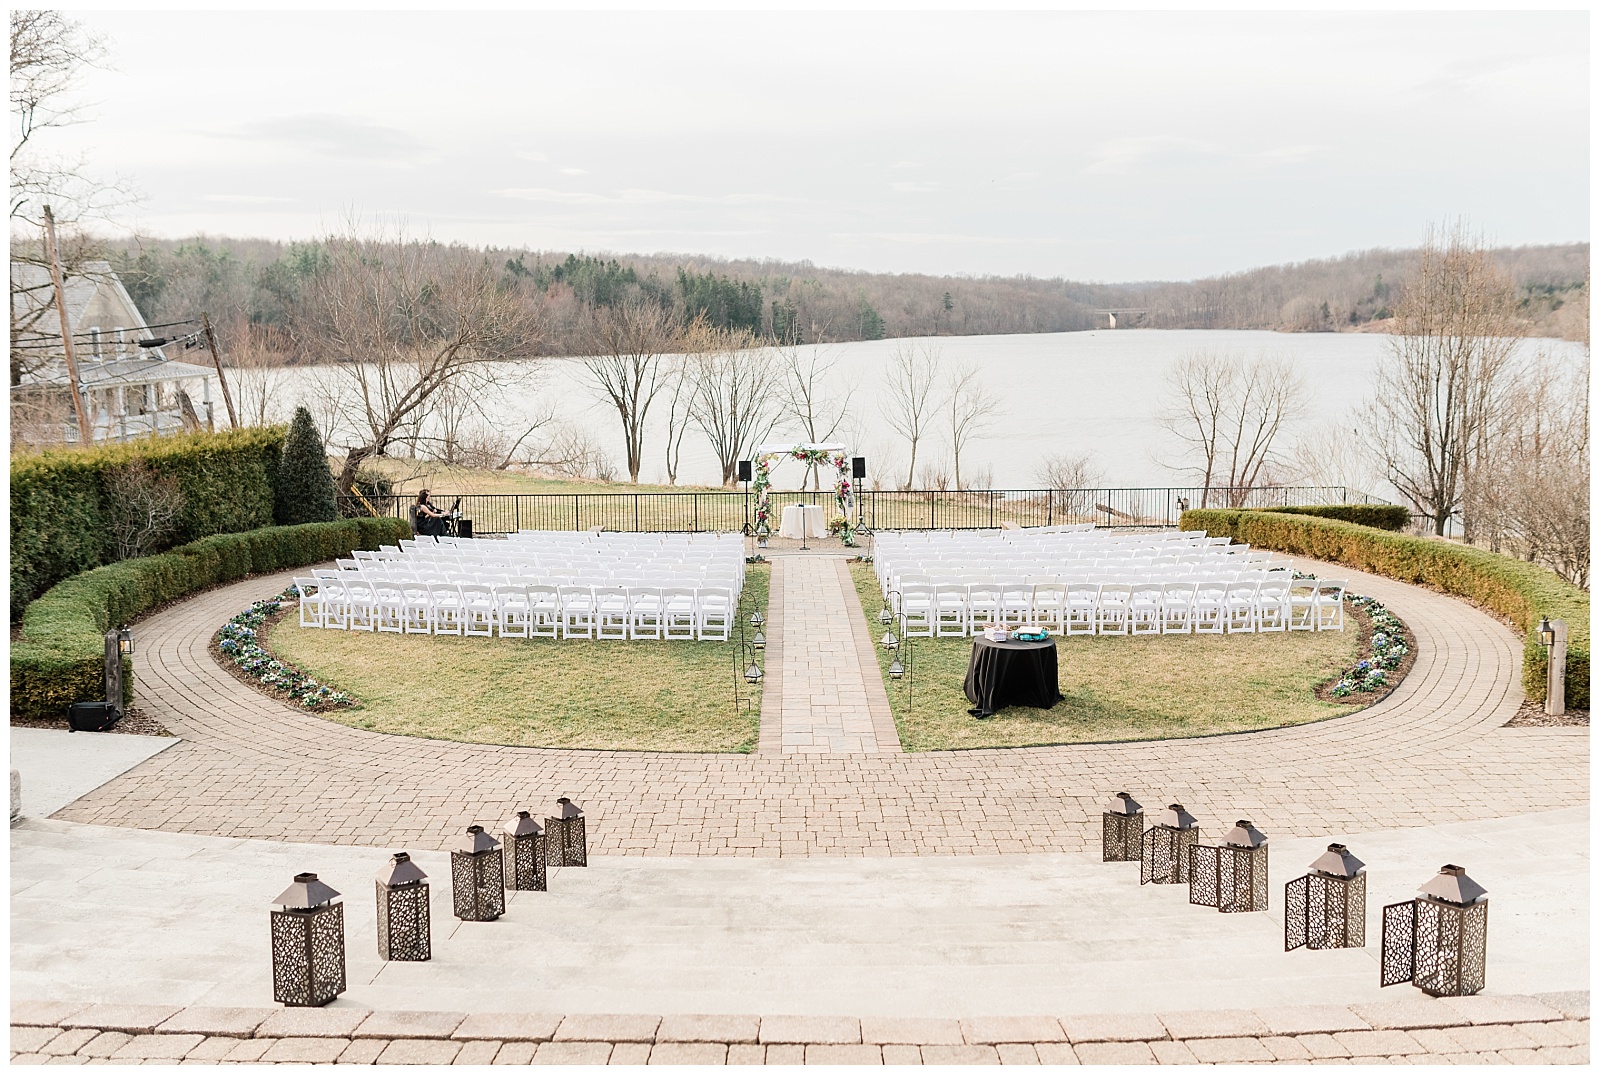 Wedding ceremony set up at The Lake House Inn in Perkasie, PA.